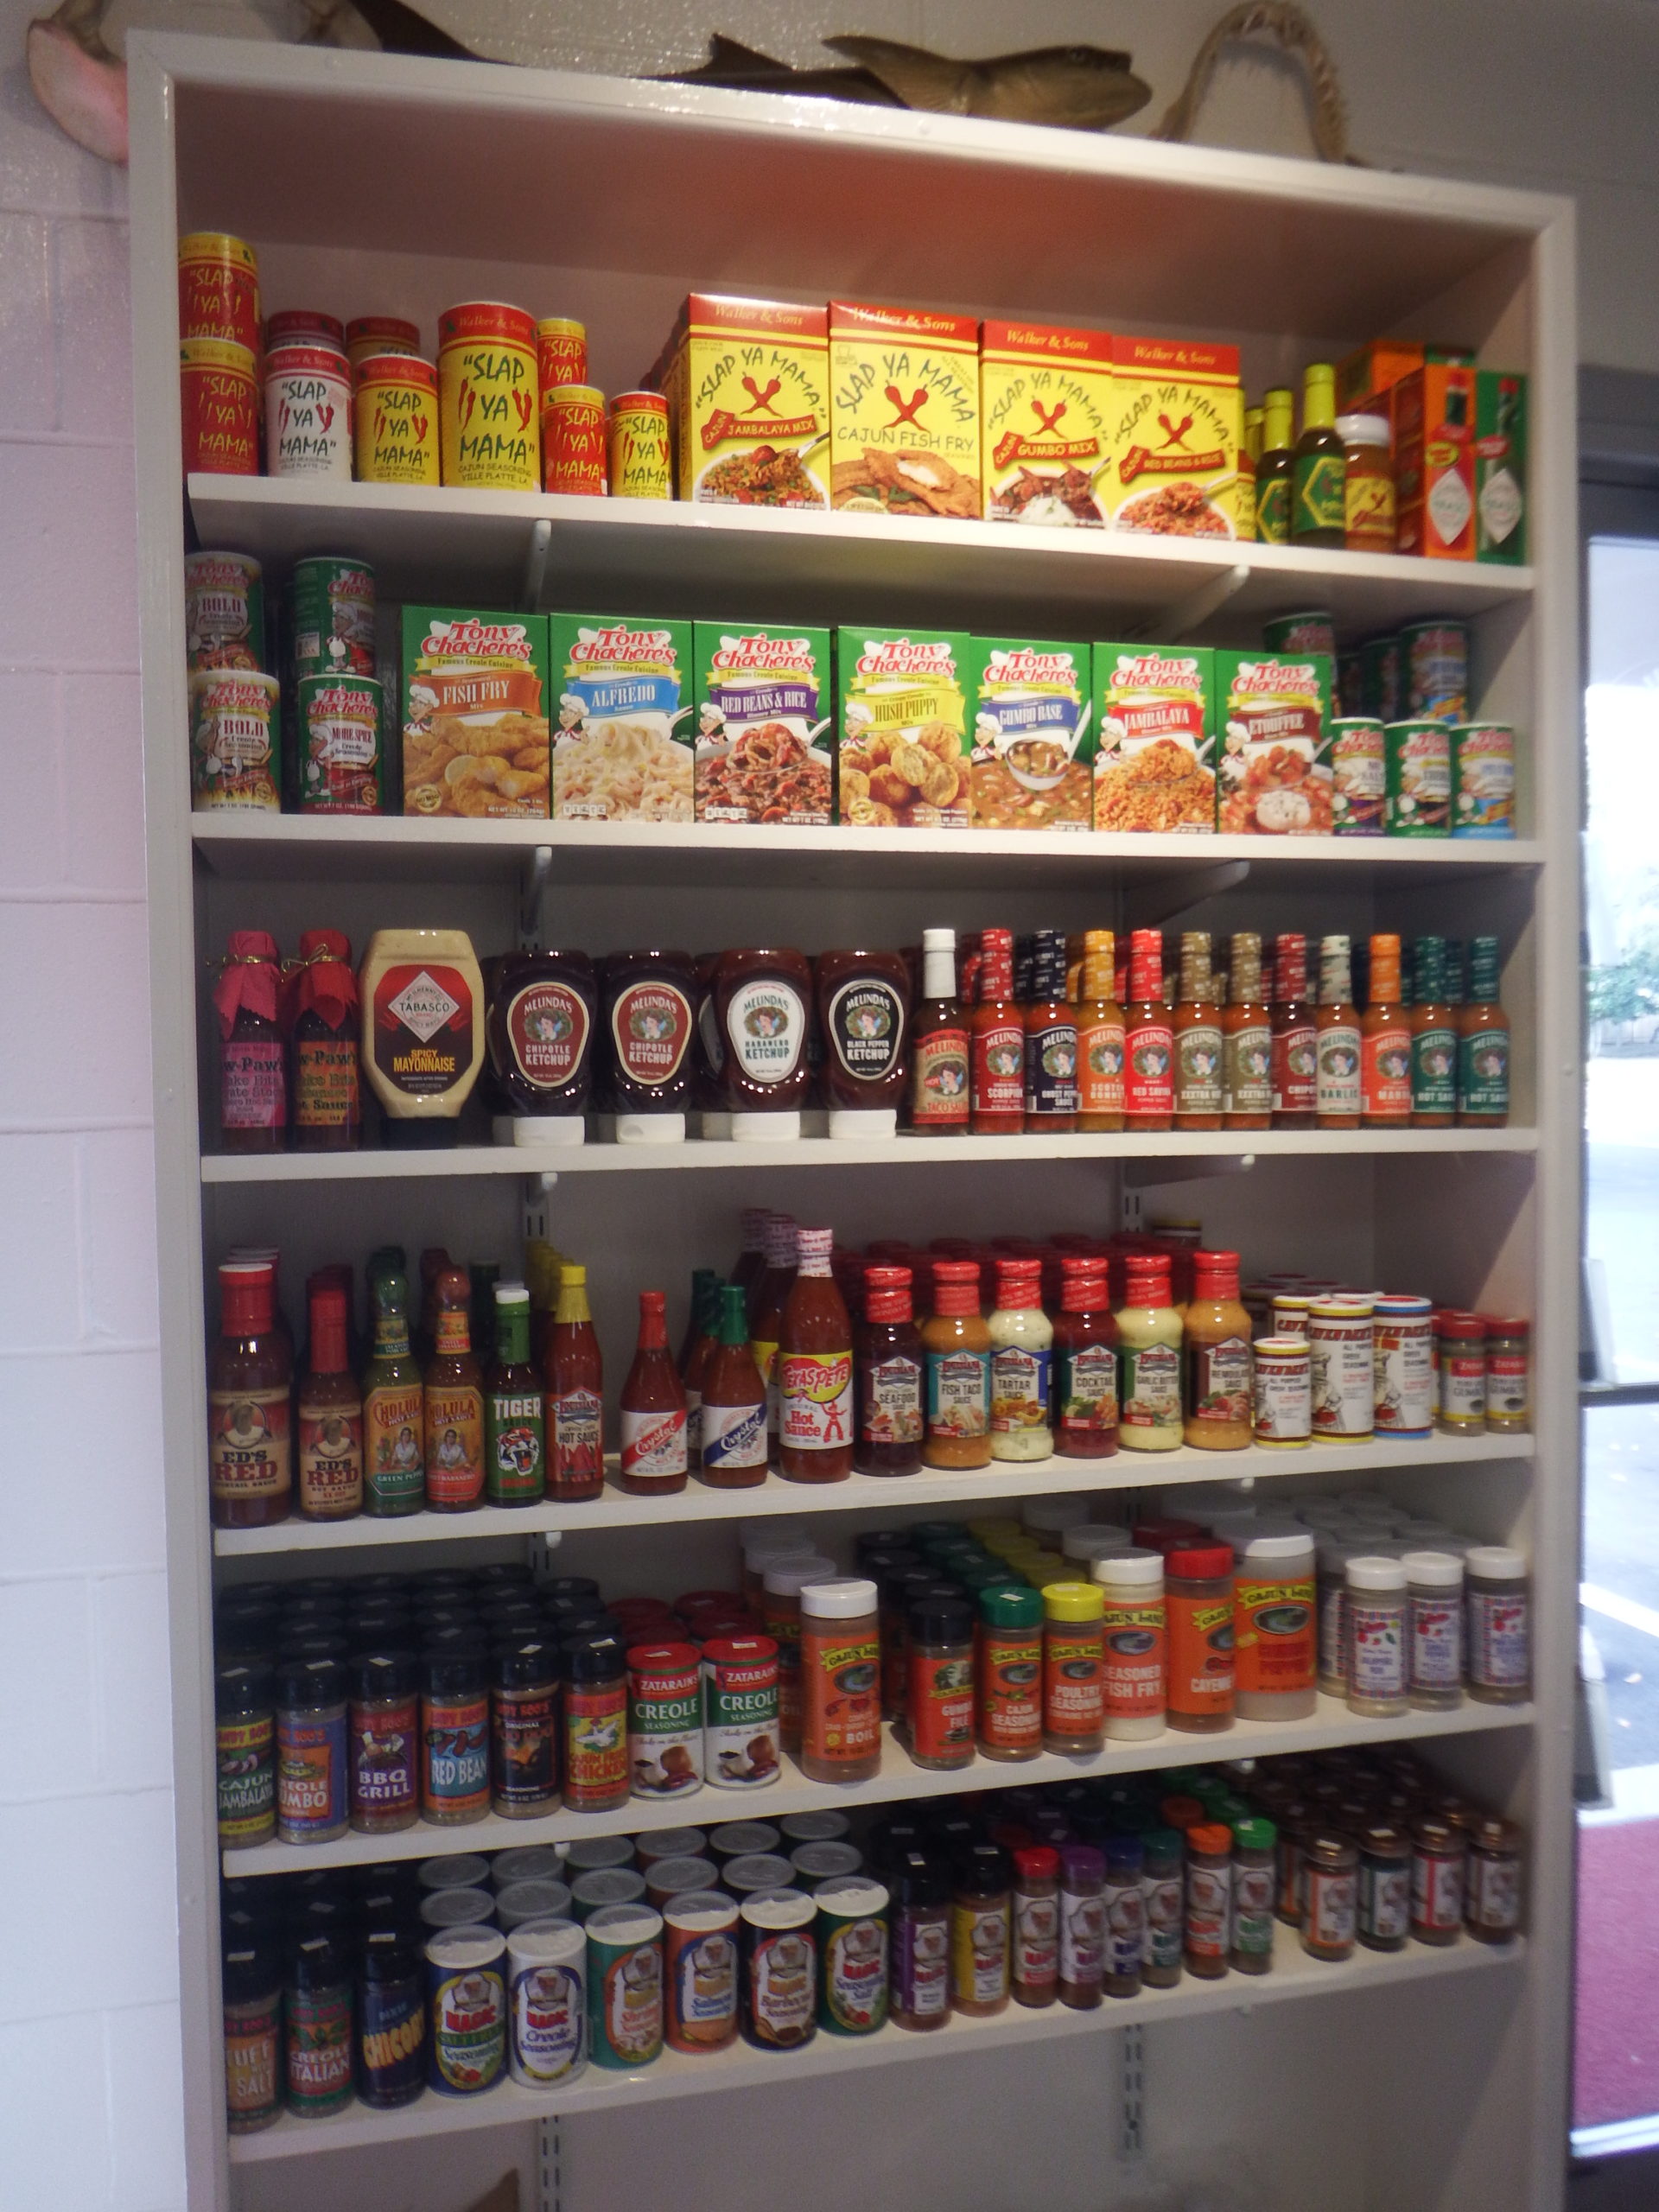 condiments, hot sauce, dried herbs, seasonings for seafood at Destin Ice market